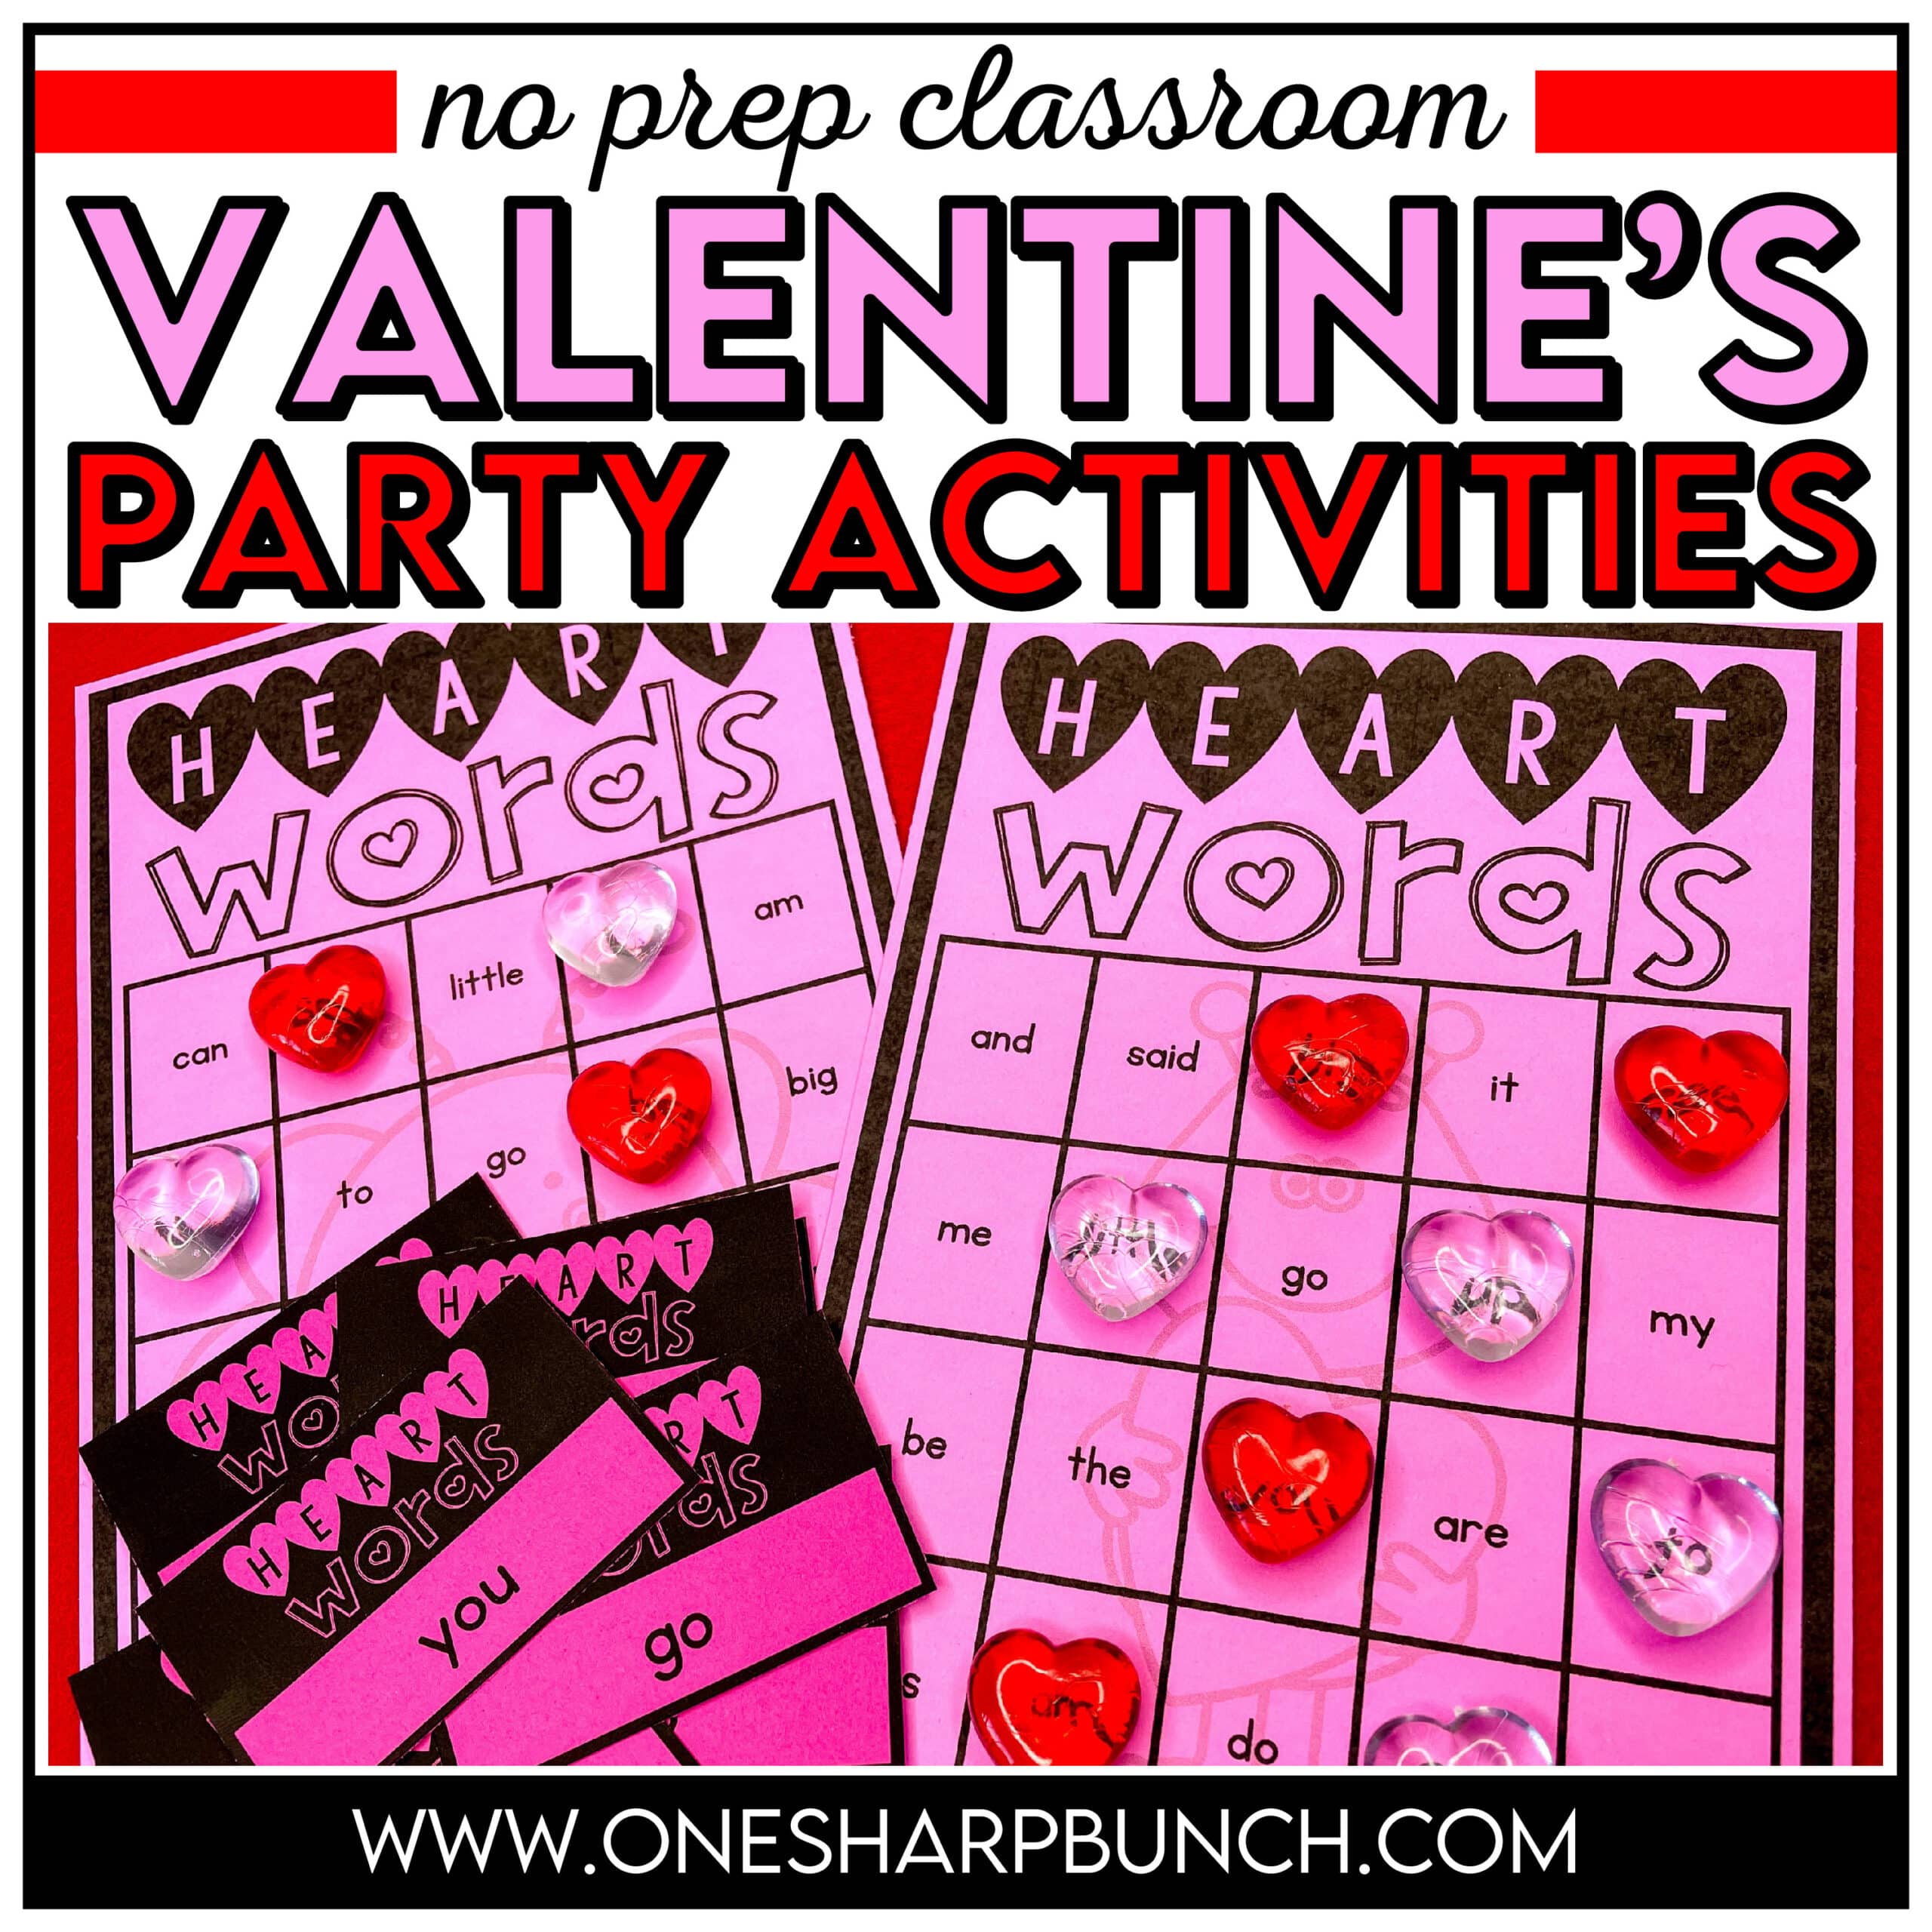 Keep your little lovebugs engaged and your classroom Valentine’s Day party well-managed with these Valentine’s Day party ideas for the classroom, including Valentine’s Day crafts, Valentine’s Day games and Valentine’s treats! These Valentine’s Day party activities and Valentine’s crafts are sure to be a lovely hit at your Valentine’s party!